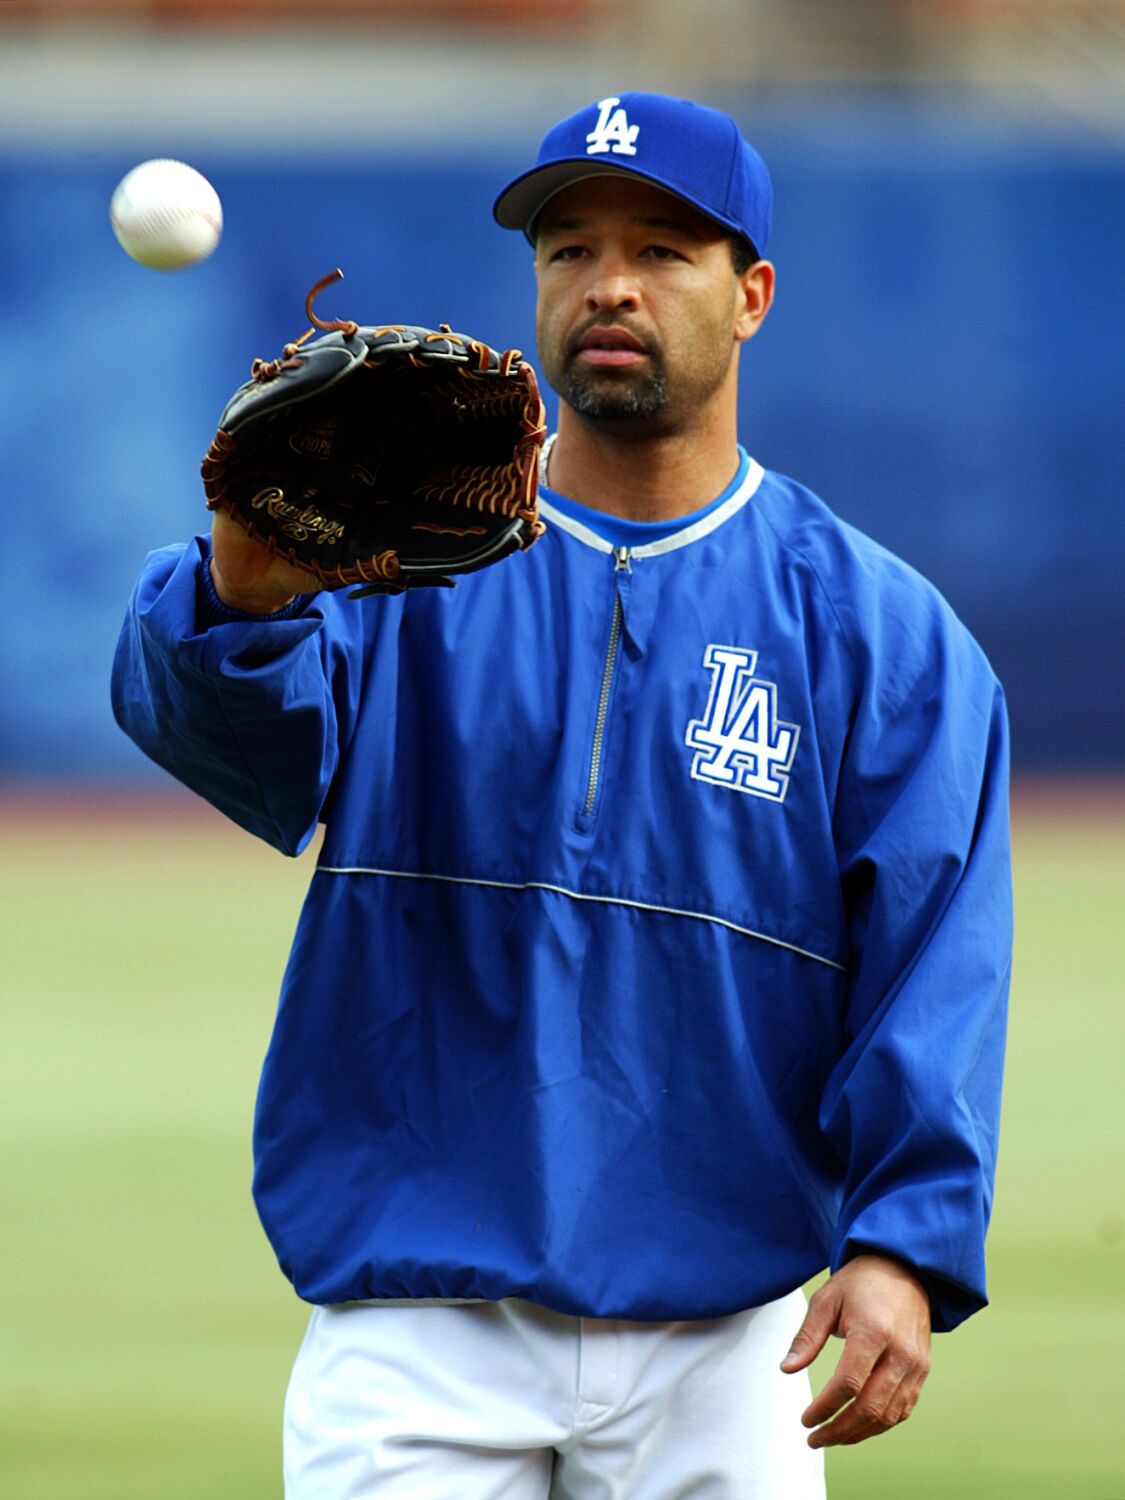 Dave Roberts understands the shock and heartache players feel at trade deadline